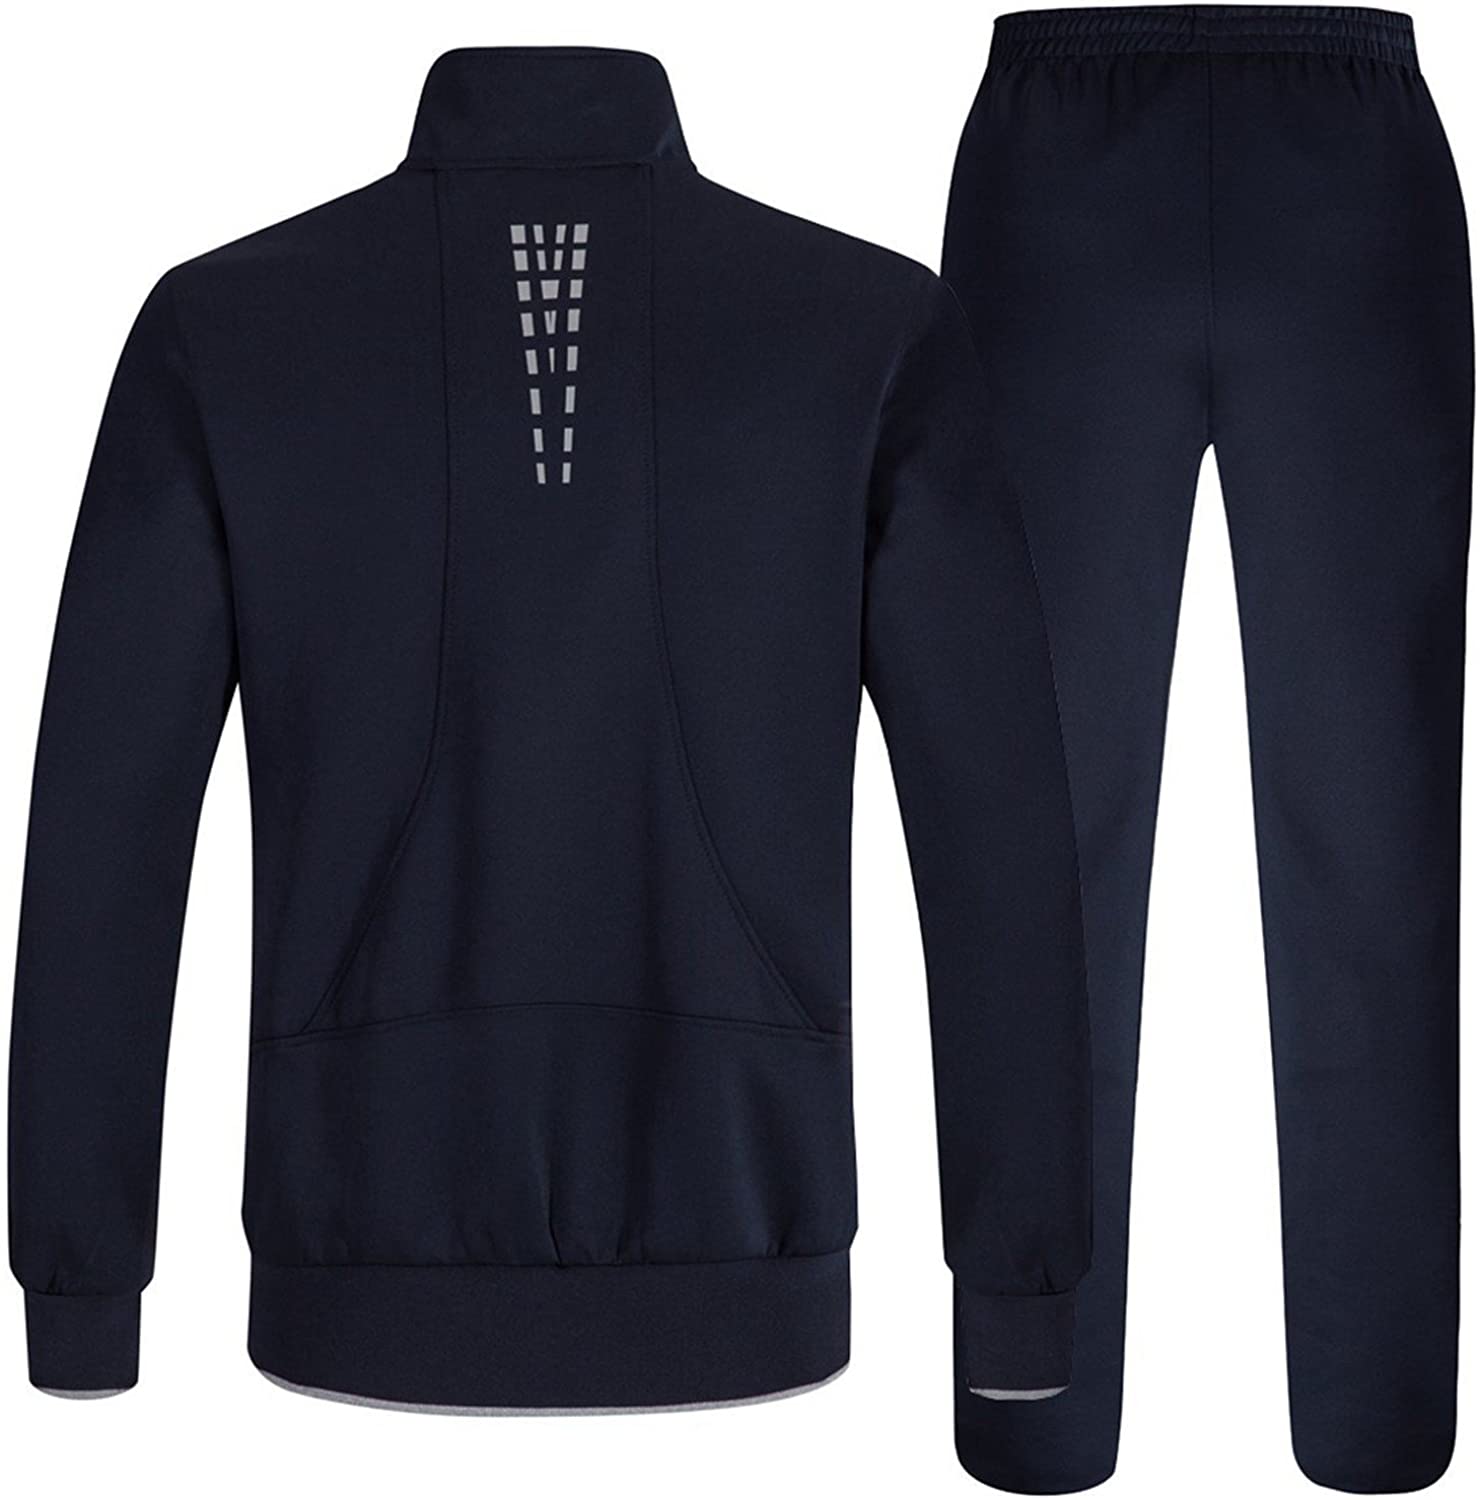 TBMPOY Men's Tracksuit Athletic Sports Casual Full Zip Sweatsuit | eBay